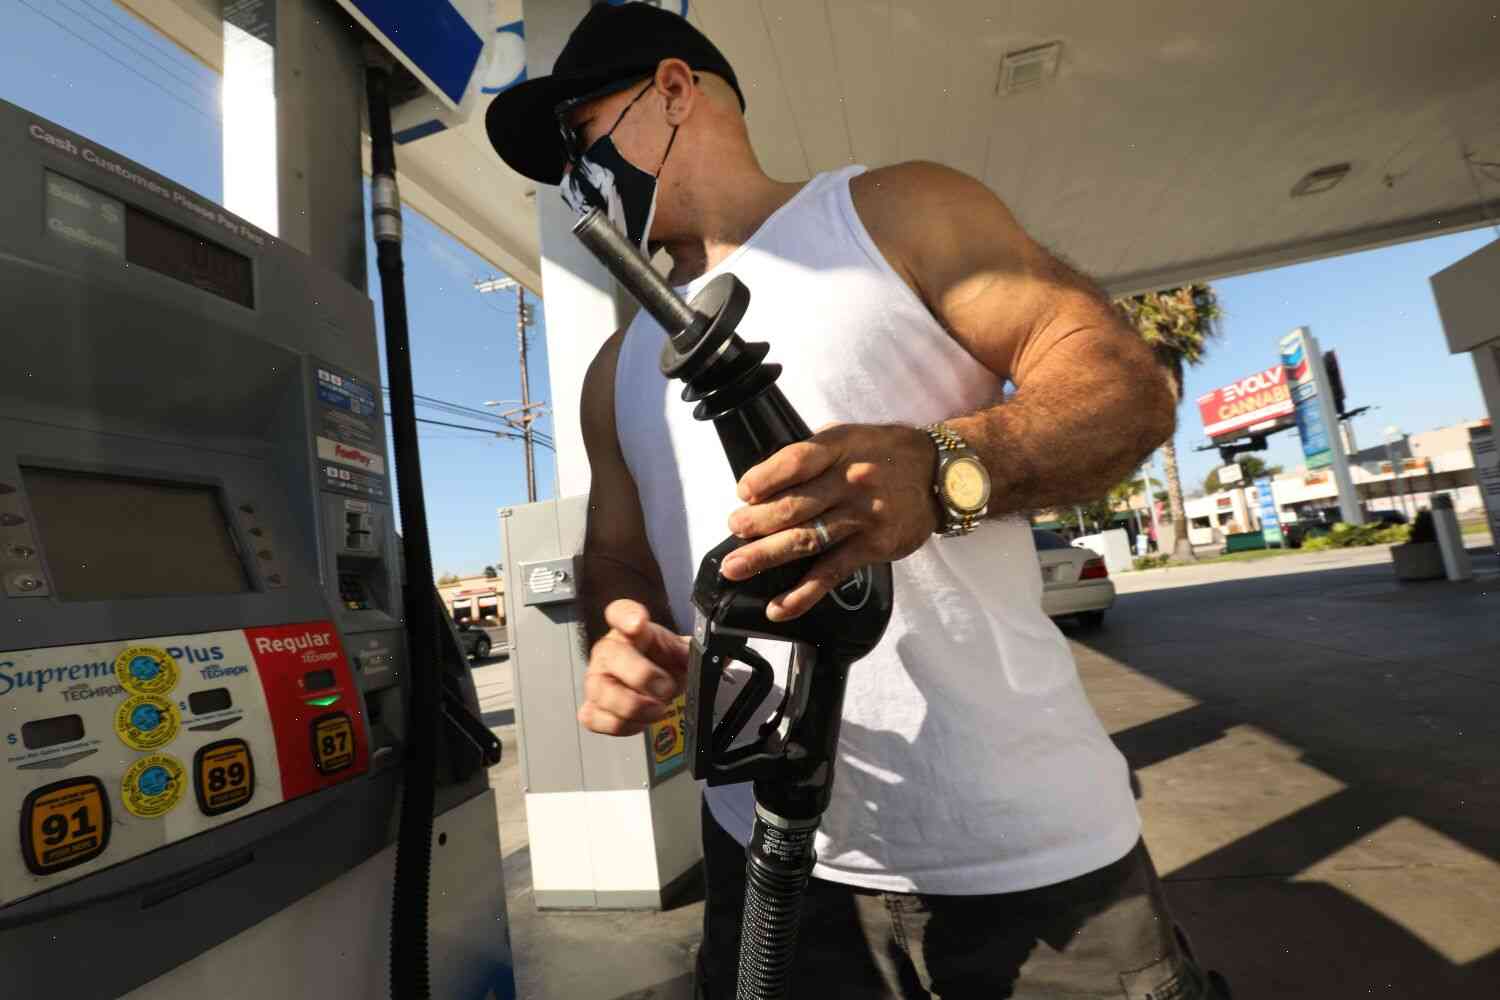 Californians are driving more, but the price of gas is rising